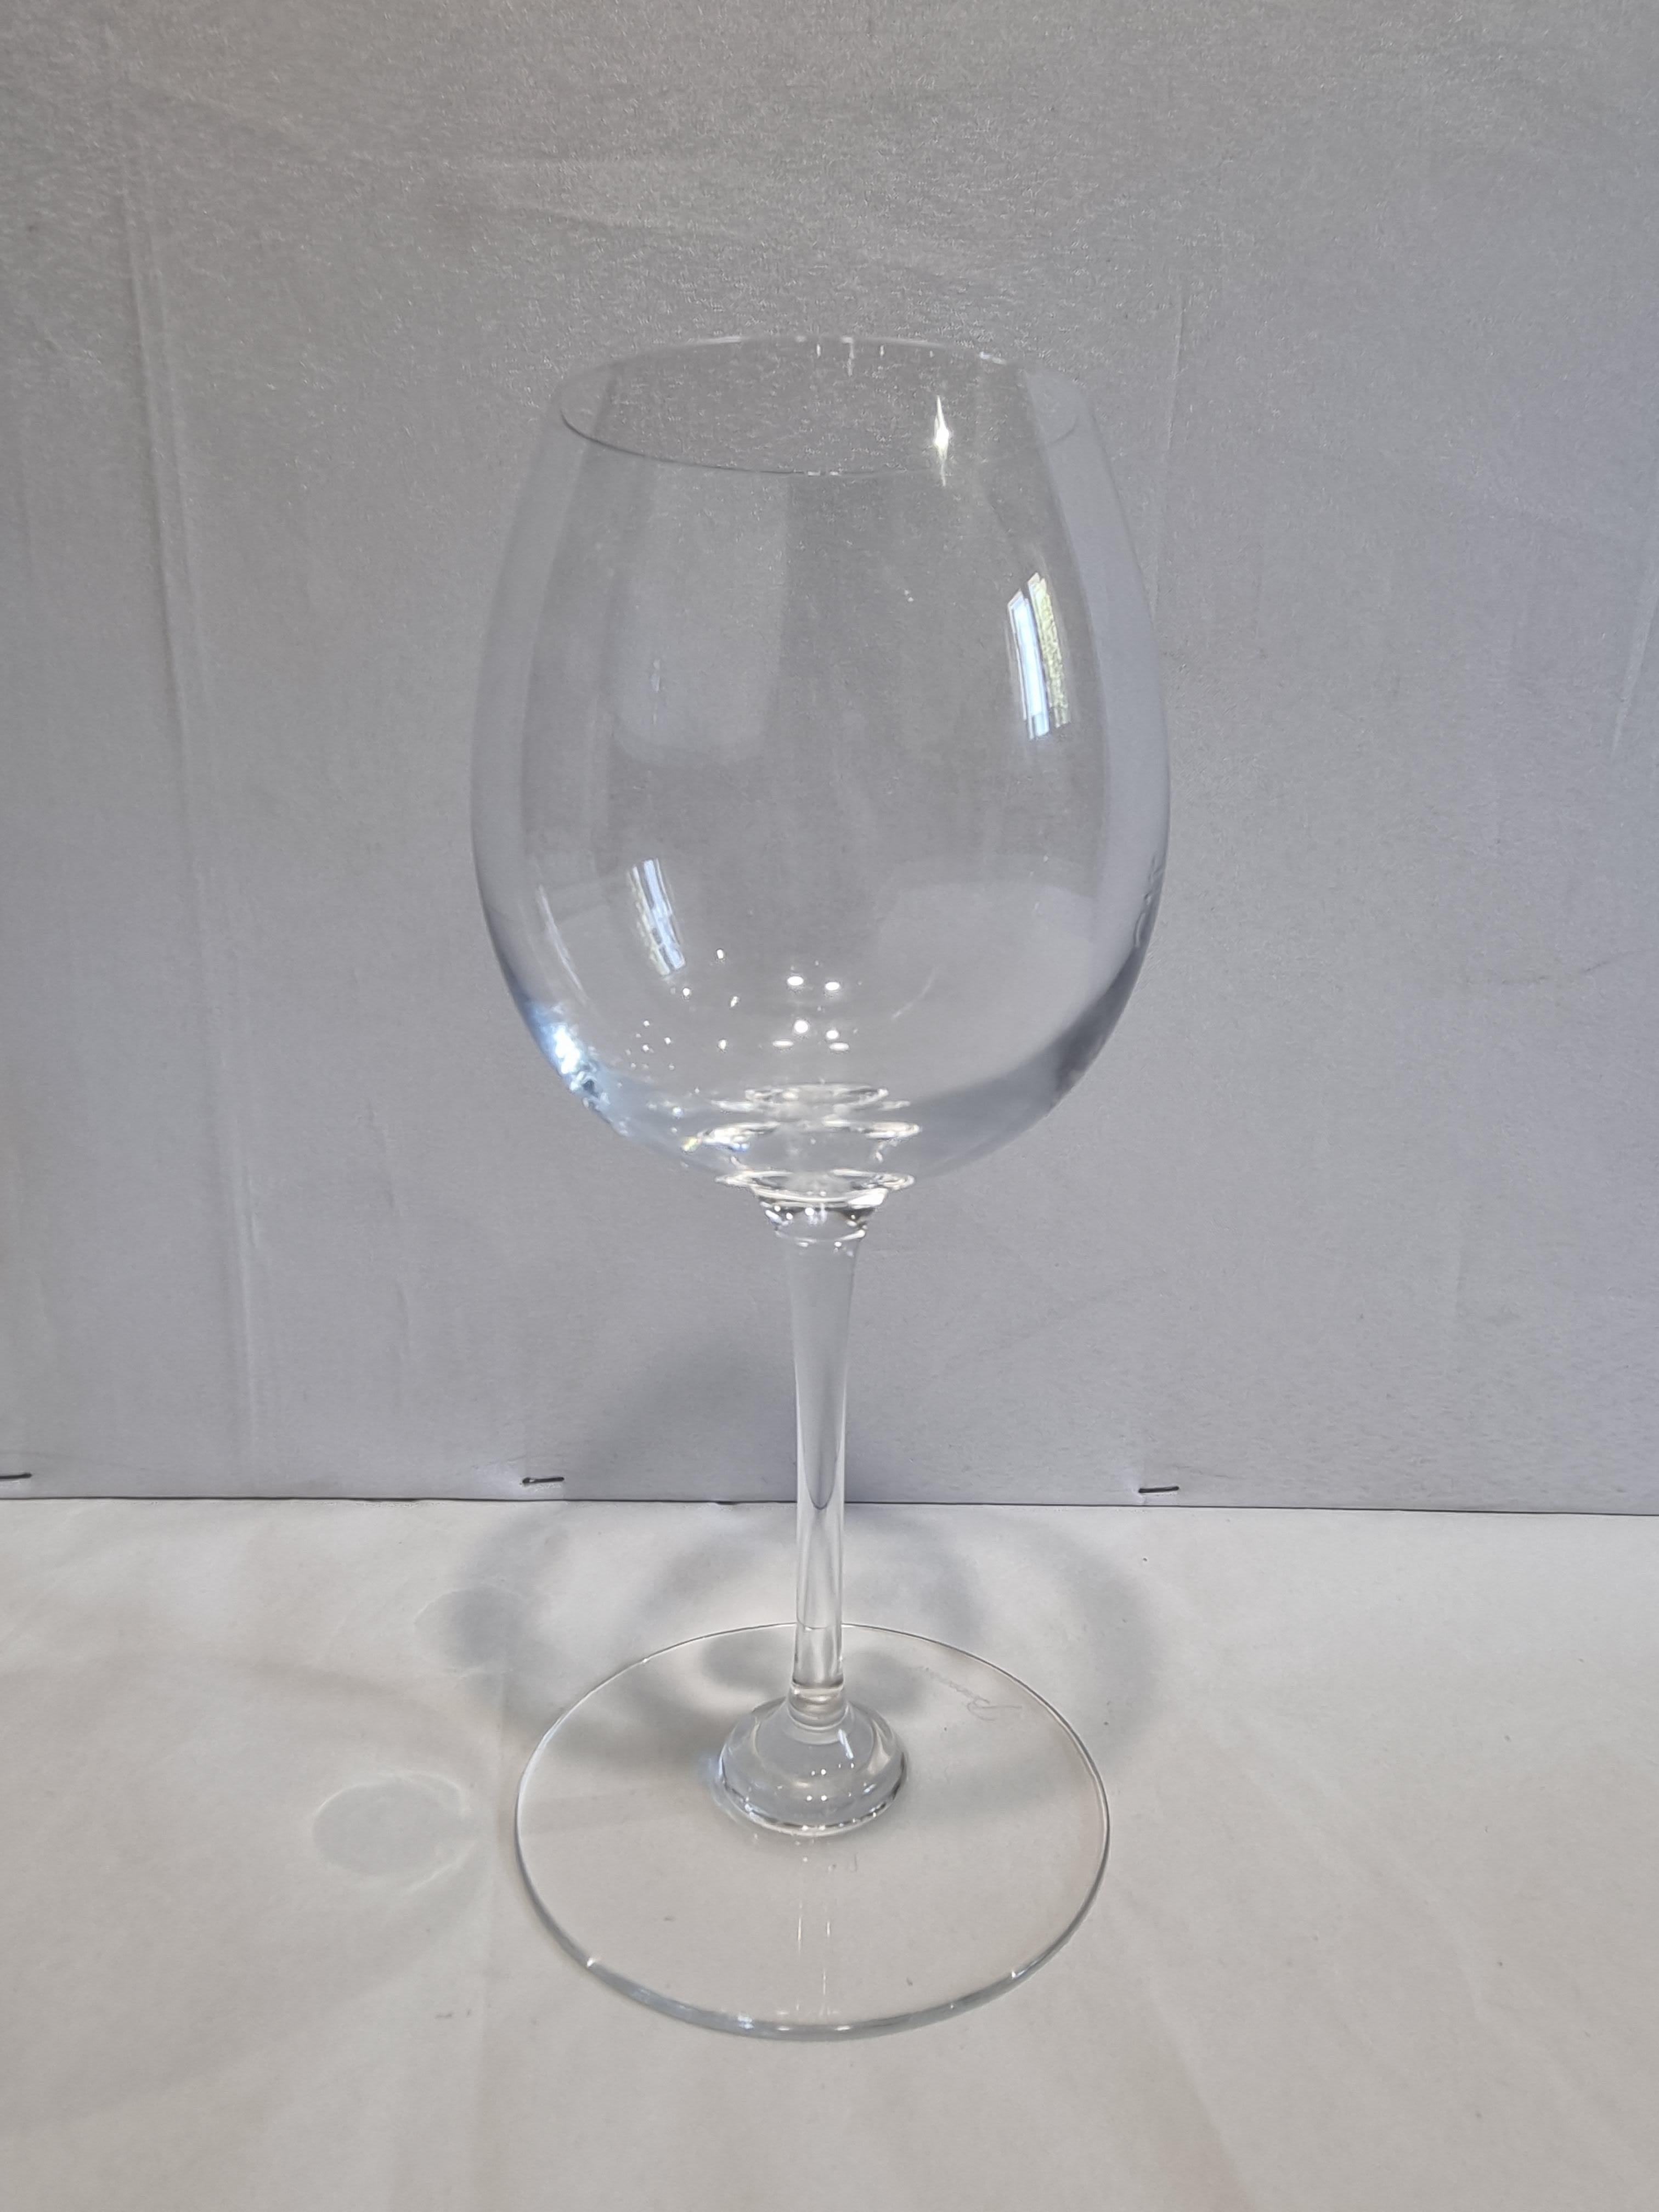 The  Bourgogne Oenologie tasting glass has a classical aesthetic and purposeful design. The bowl’s shape opens the aromatic depth of the wine’s bouquet maximizing its flavorful balance of fruit and acidity.
Wine glasses for a stunning